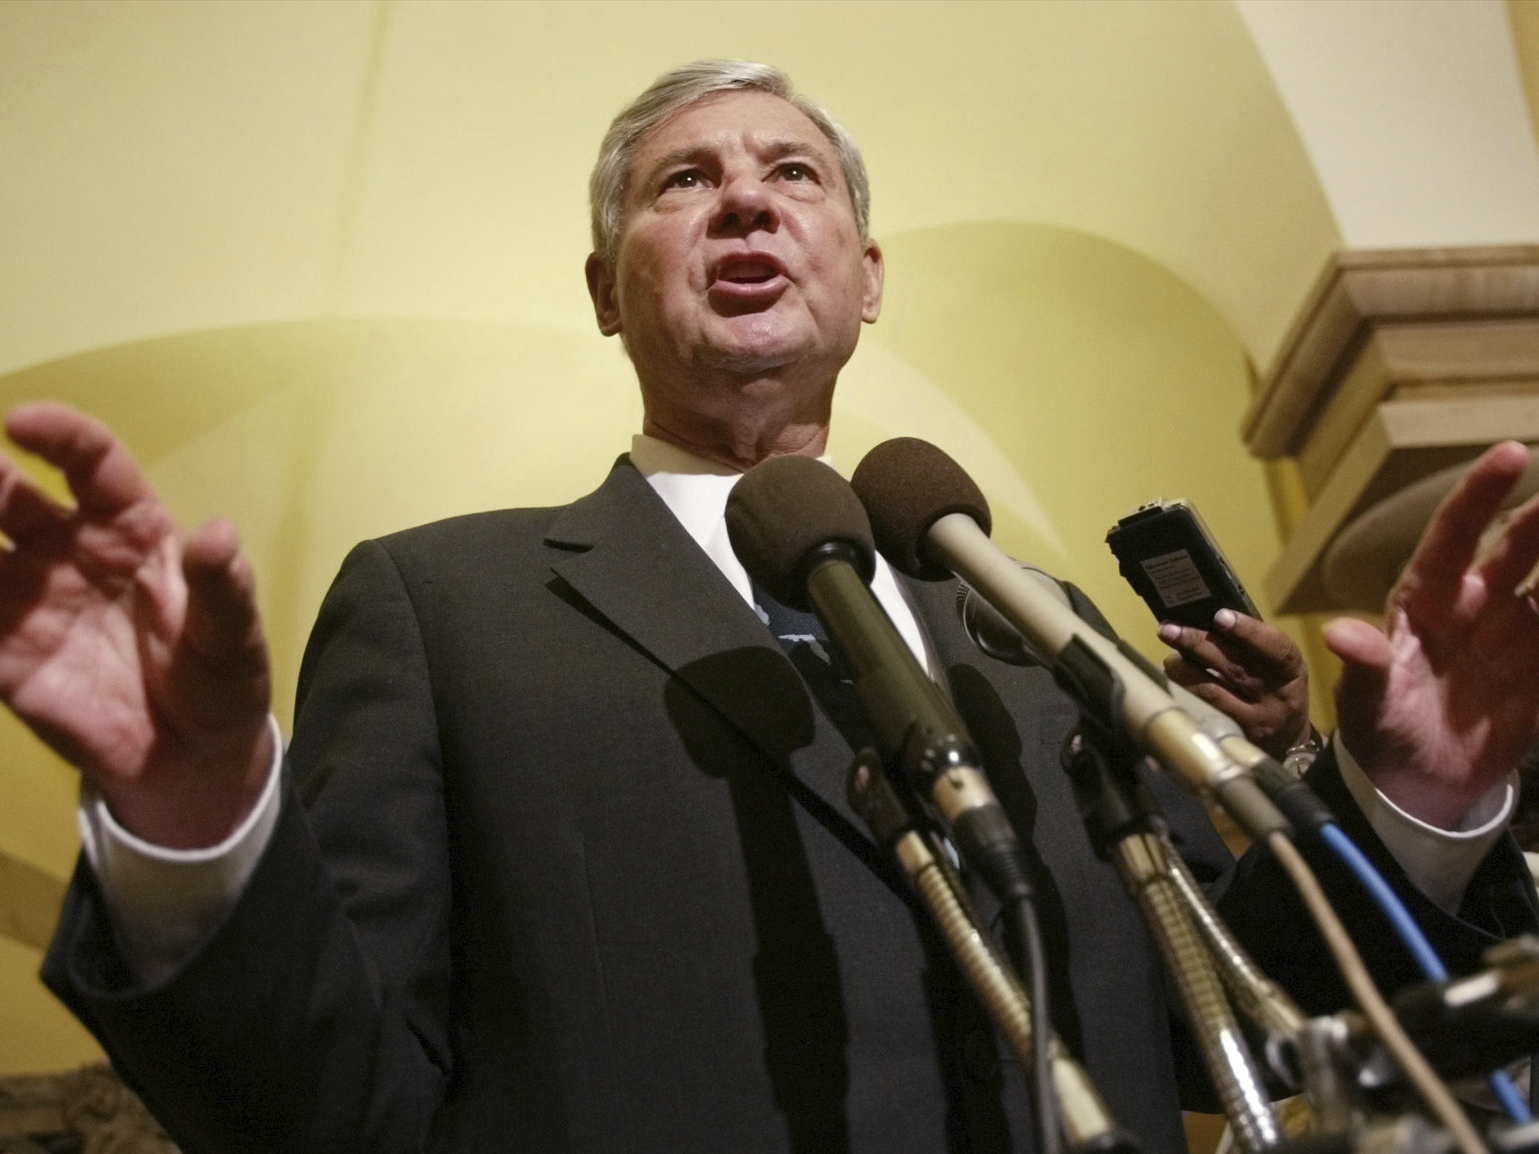 Former Senate Intelligence Committee Chairman Sen. Bob Graham, D-Fla., gestures as he answers questions on Capitol Hill, June 18, 2002, in Washington.